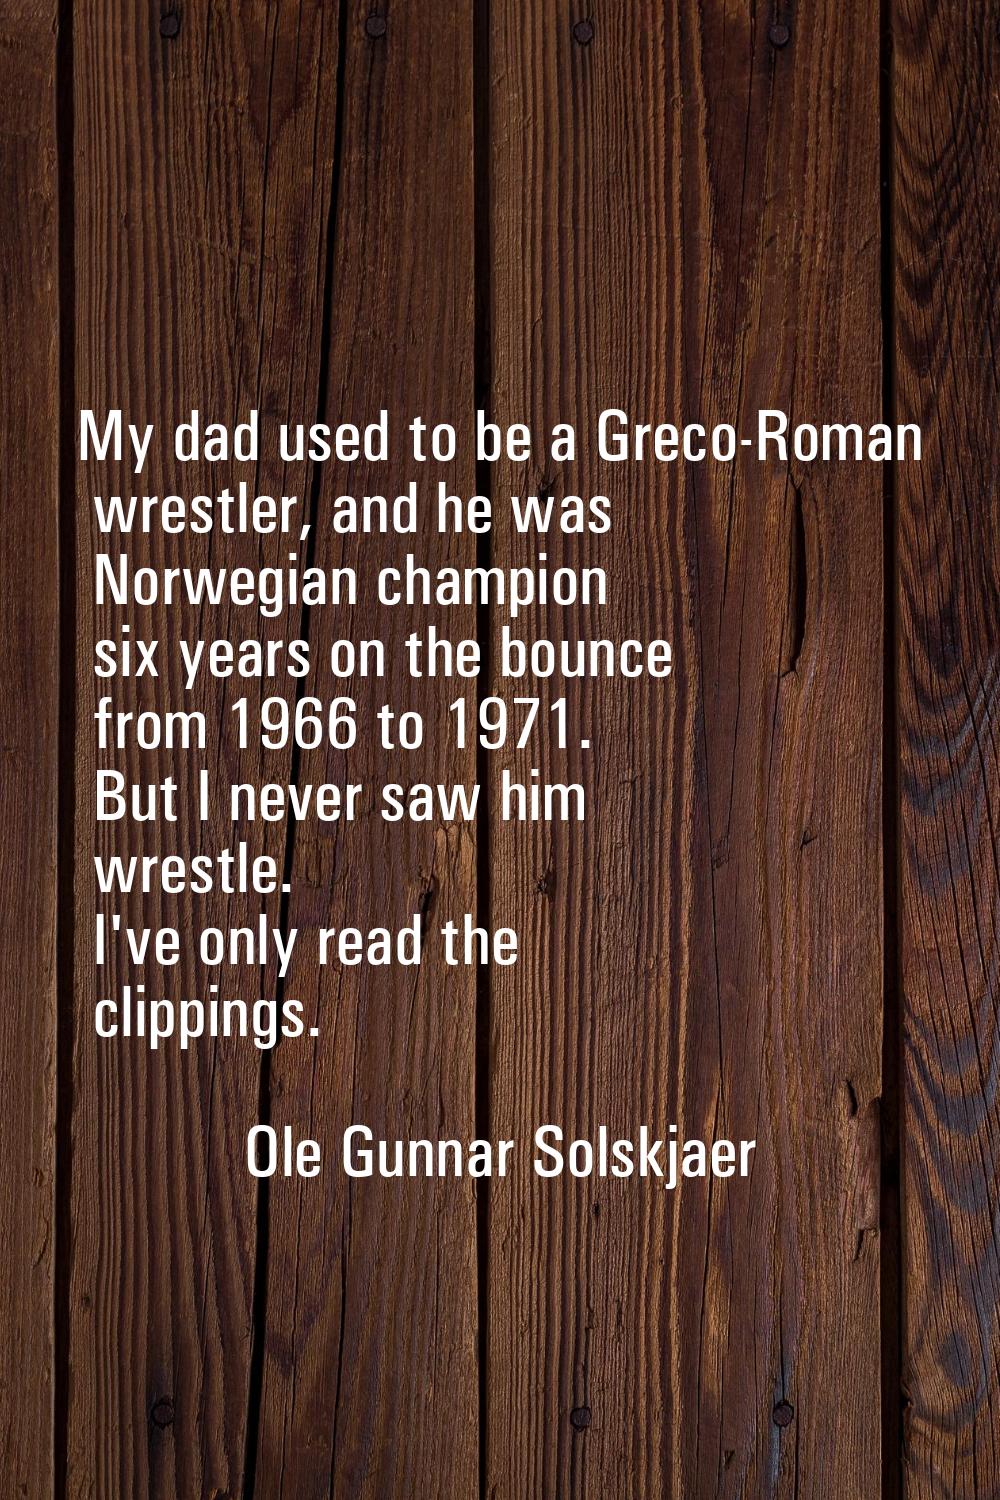 My dad used to be a Greco-Roman wrestler, and he was Norwegian champion six years on the bounce fro